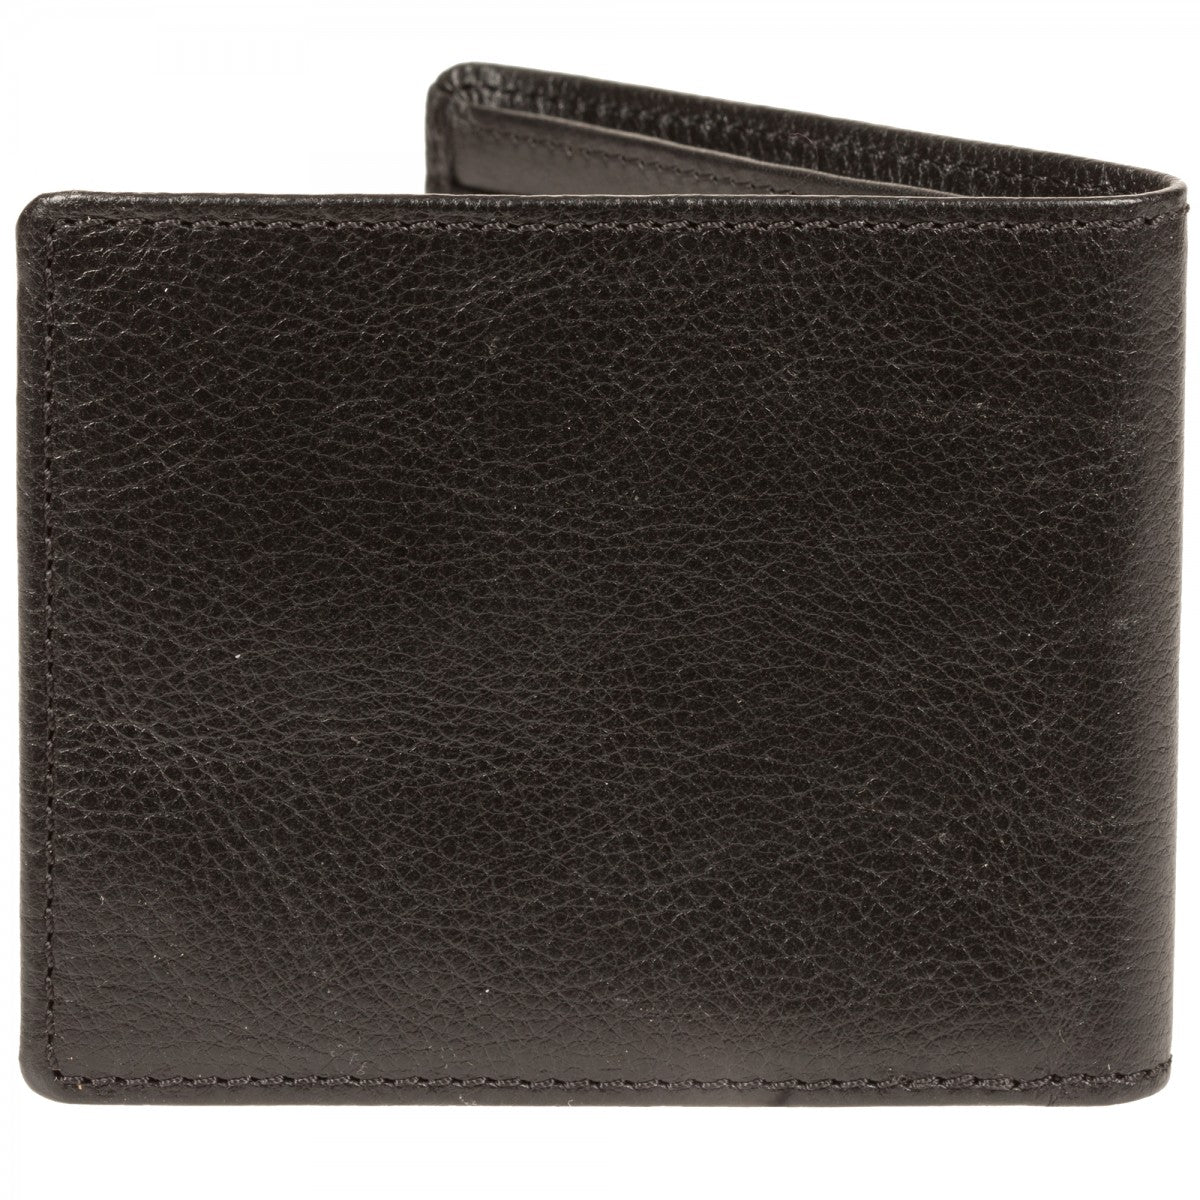 Will Leather Goods Classic Bifold Black Leather Wallet, Vegetable Tanned, Top Grain Leather, 4.5" x 3.75"